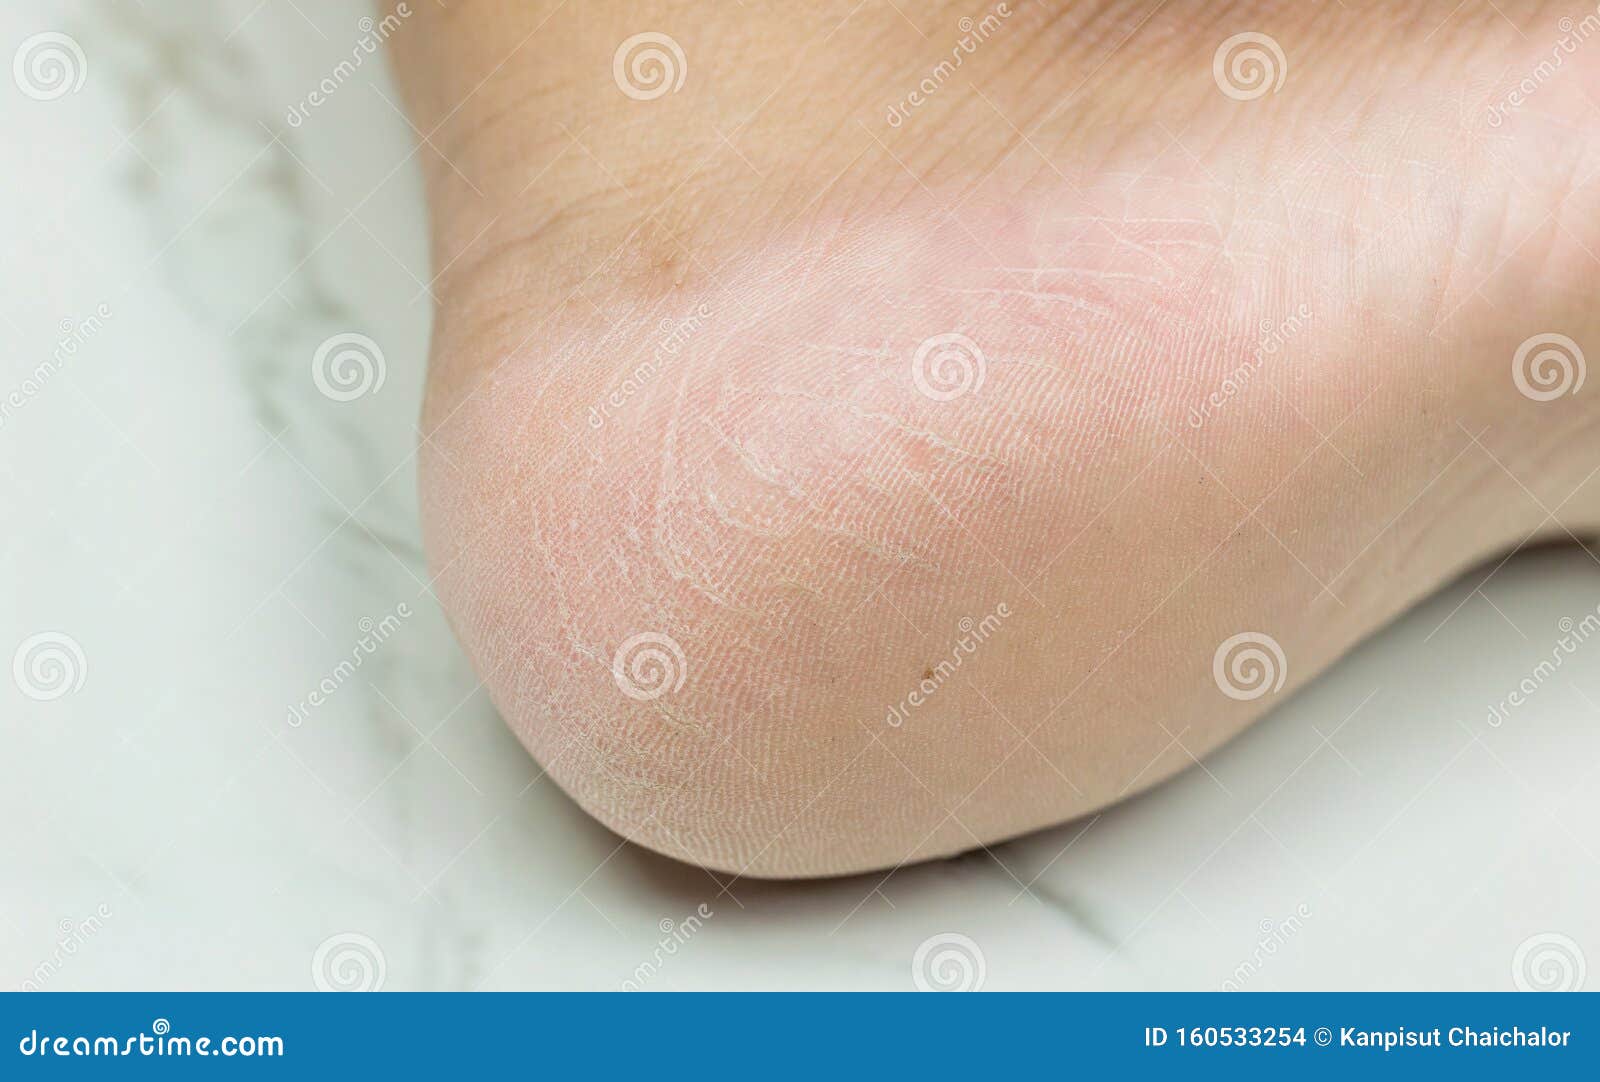 What is the Difference Between Gout vs Bunion? | The Bunion Cure